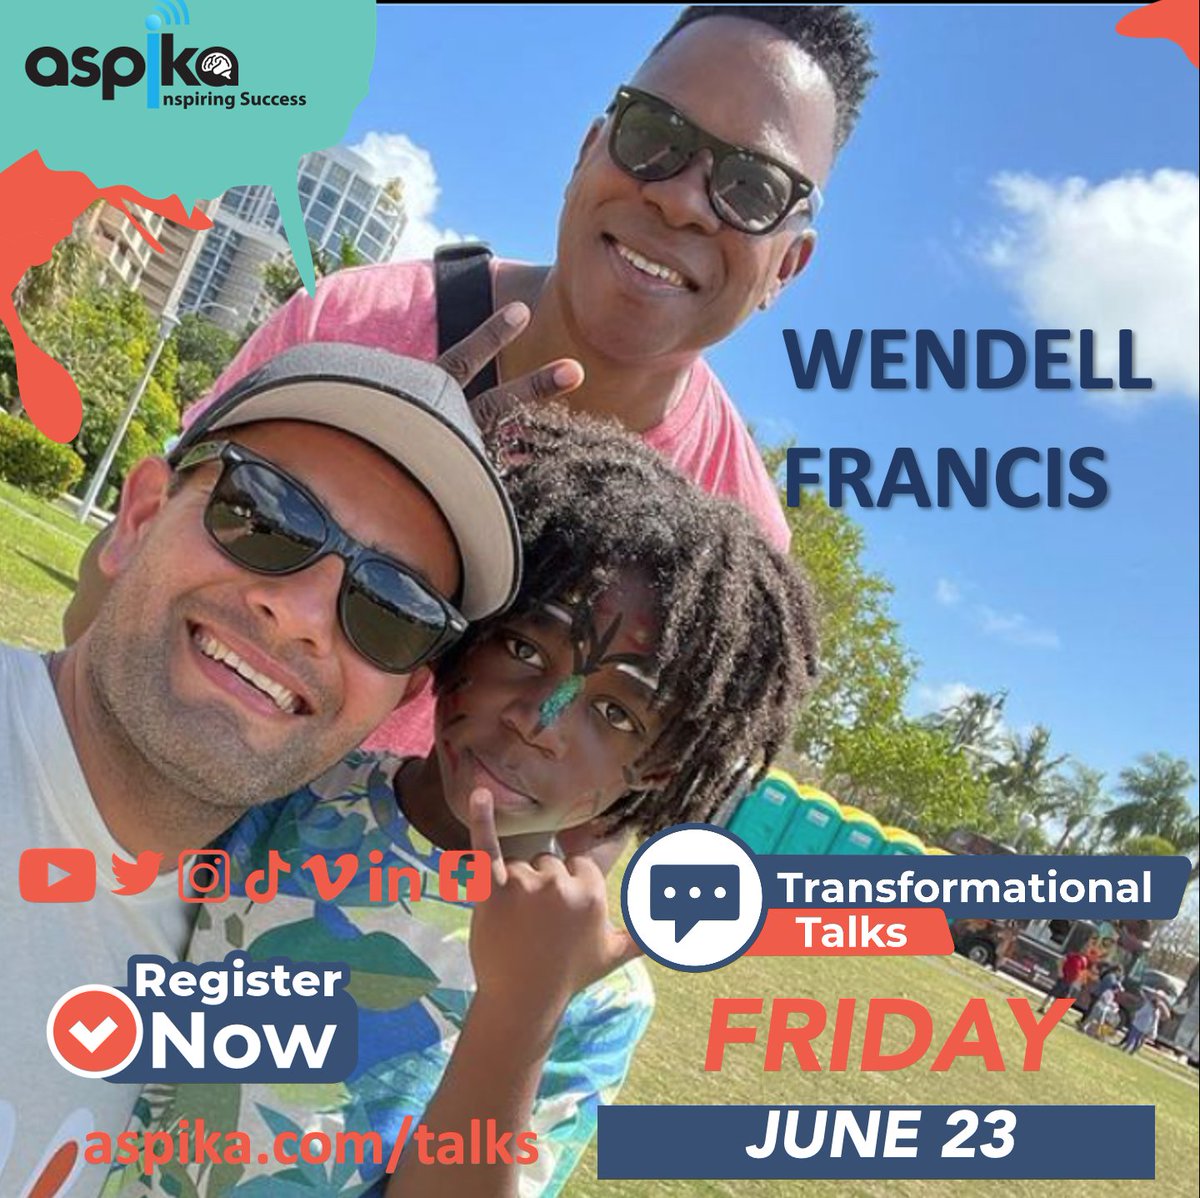 ASPIKA welcomes Wendell Francis
Friday, June 23
Register at aspika.com Talks
#LifeVariableAnnuity #securitiesinvestment #financialplanning #financialliteracy #profit #nonprofit #aspika #neurodiversity #lovewhatyoudo #lovewhoyouare #financialservices #investment